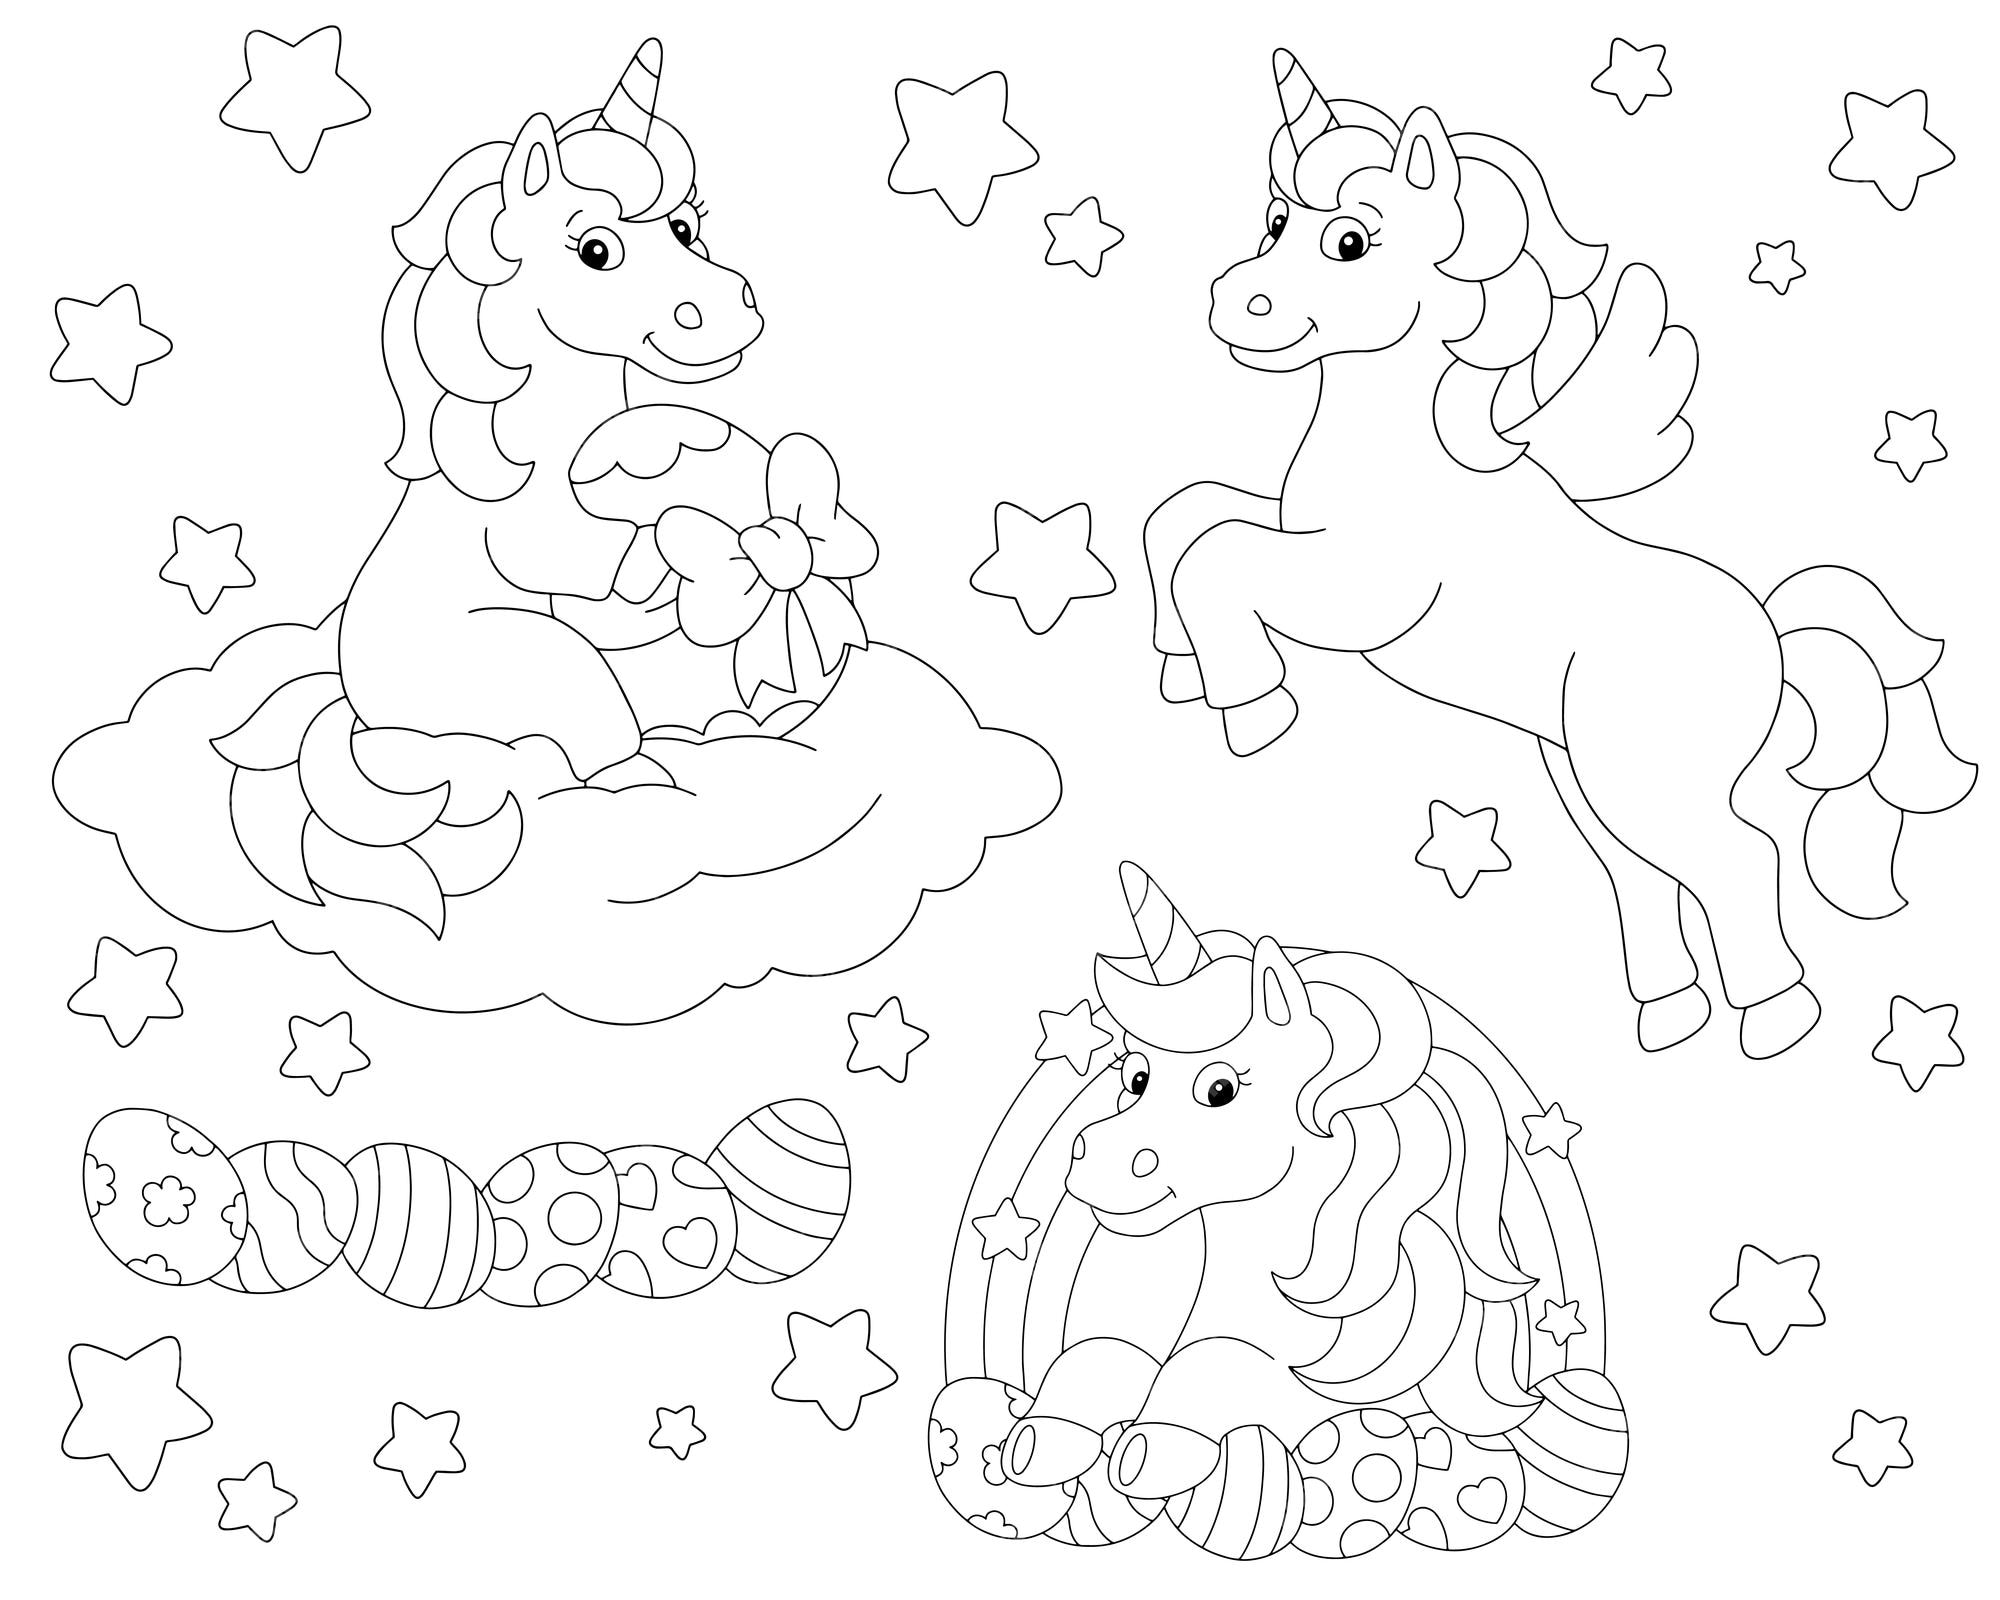 Unicorn Coloring Pages Images   Free Vectors, Stock Photos & PSD